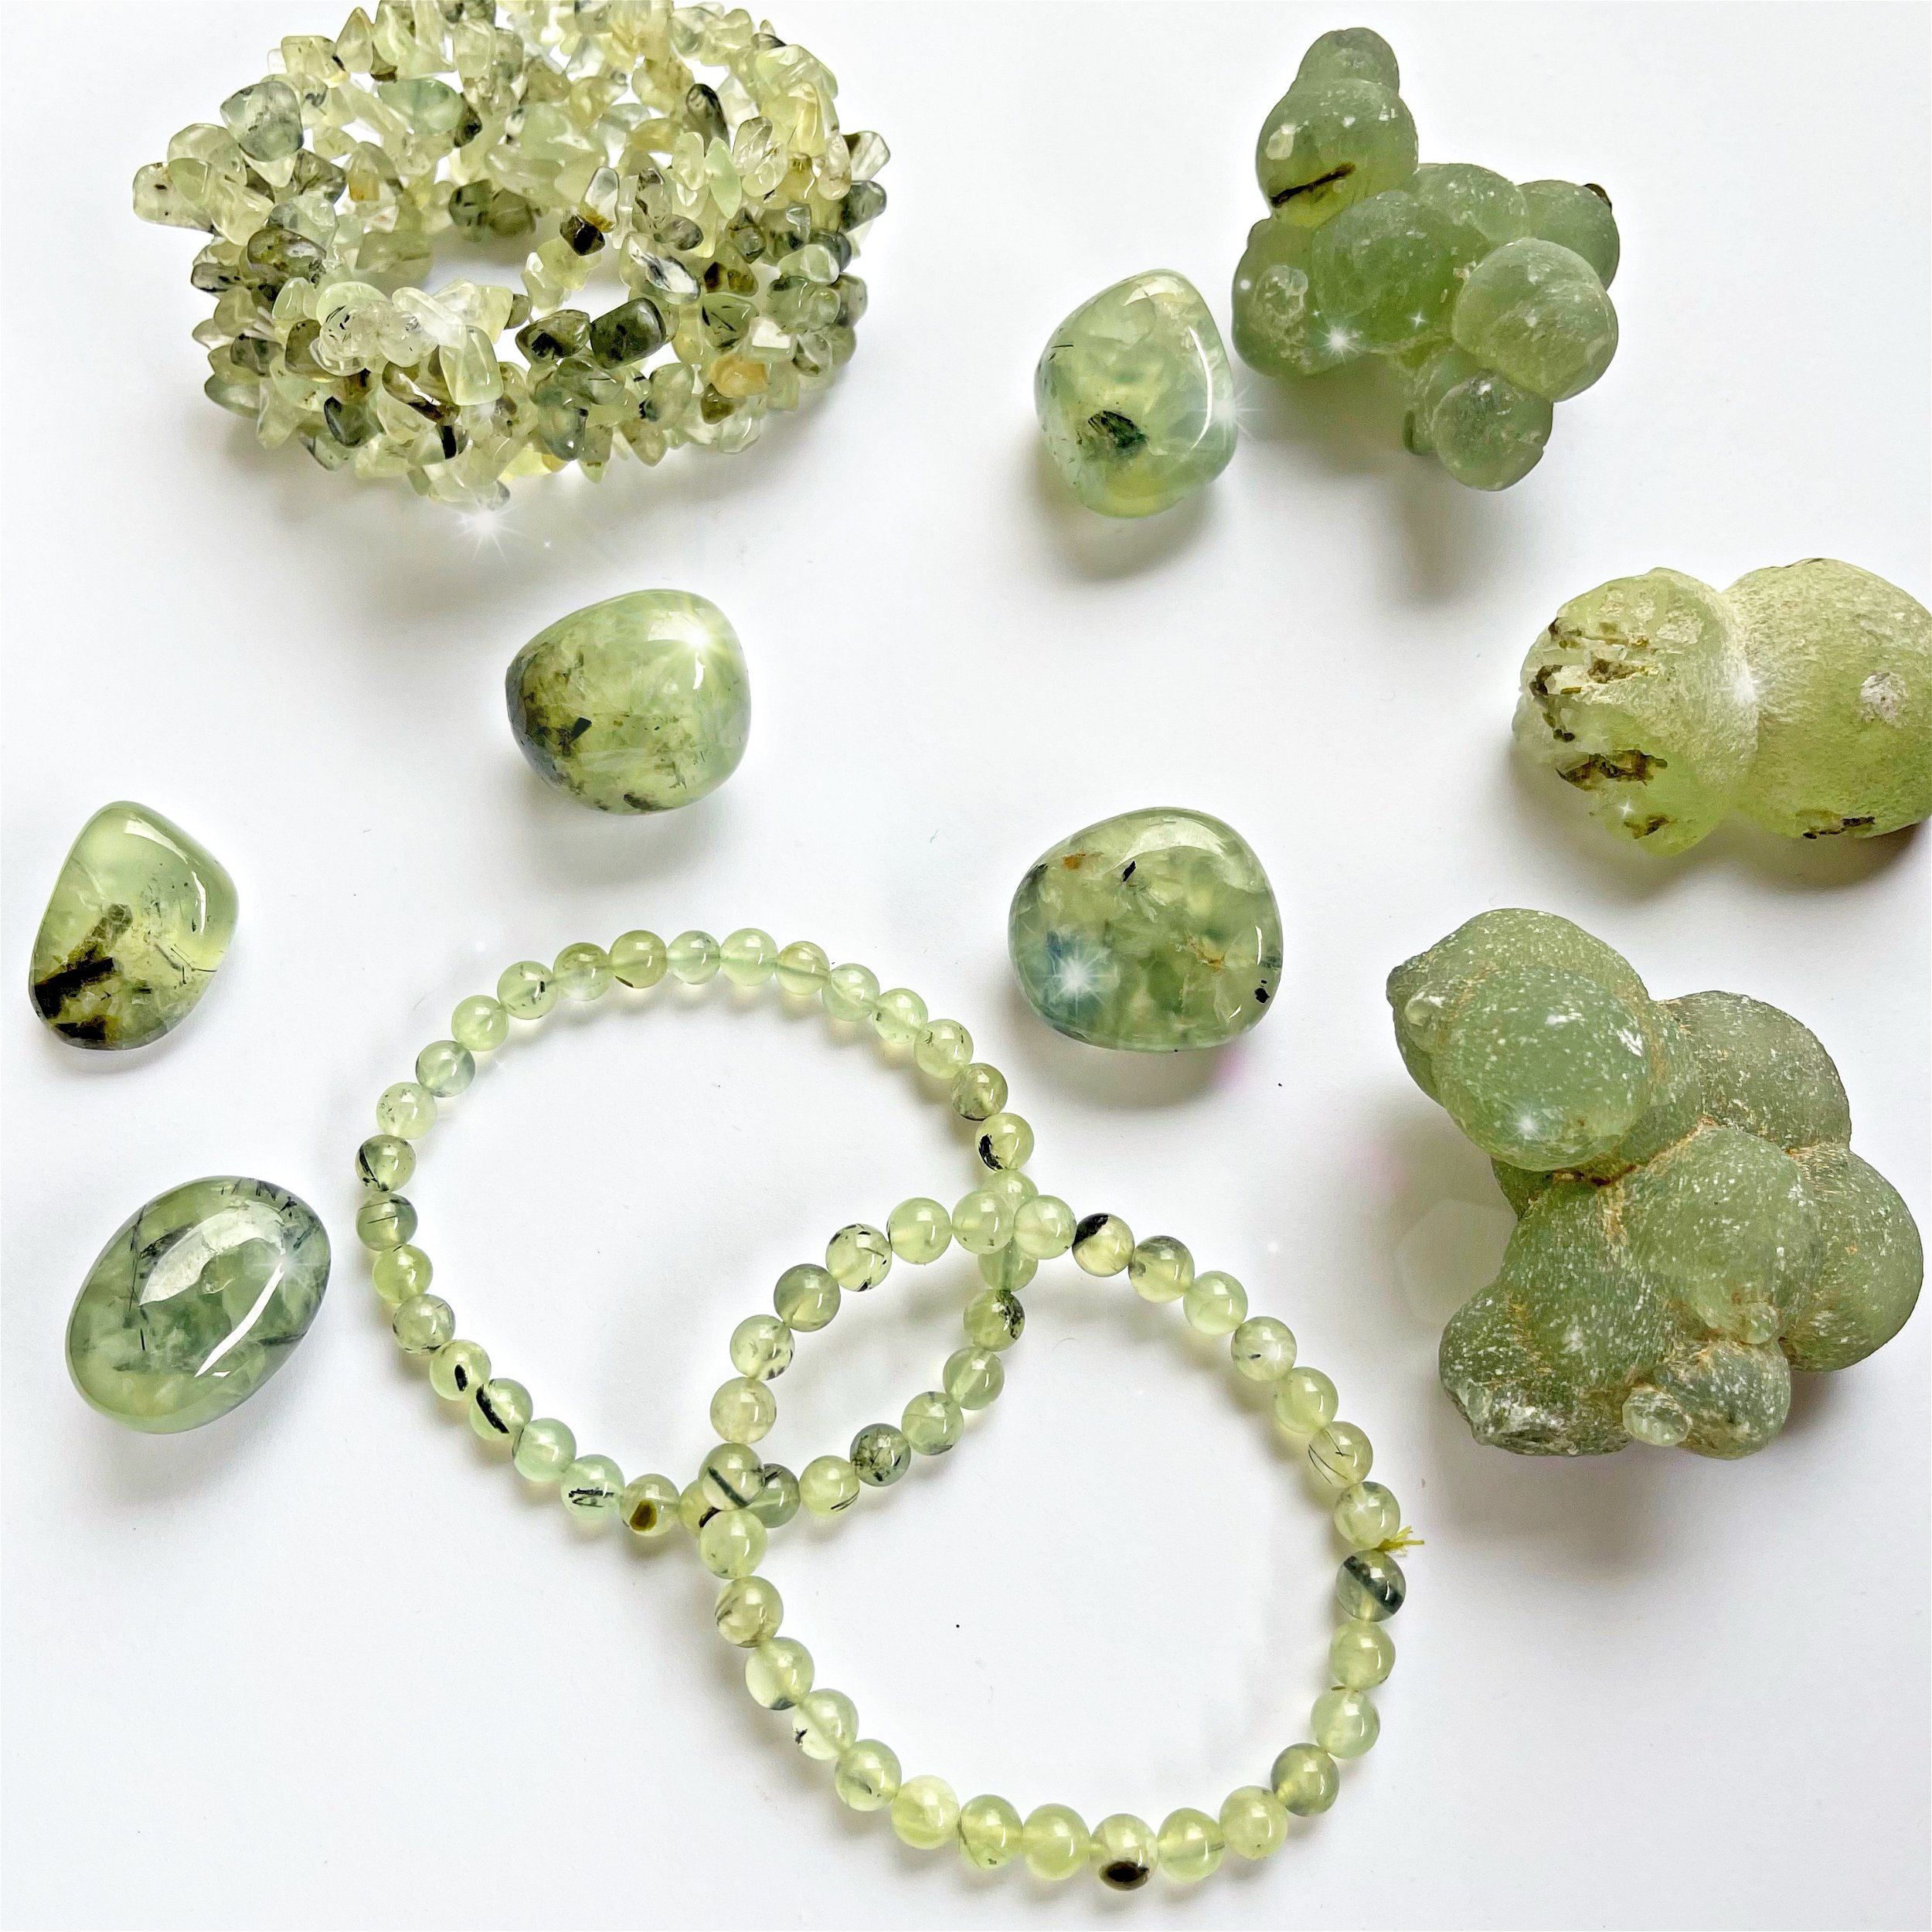 Tumbled Prehnite (Singles) With Epidote from Mali